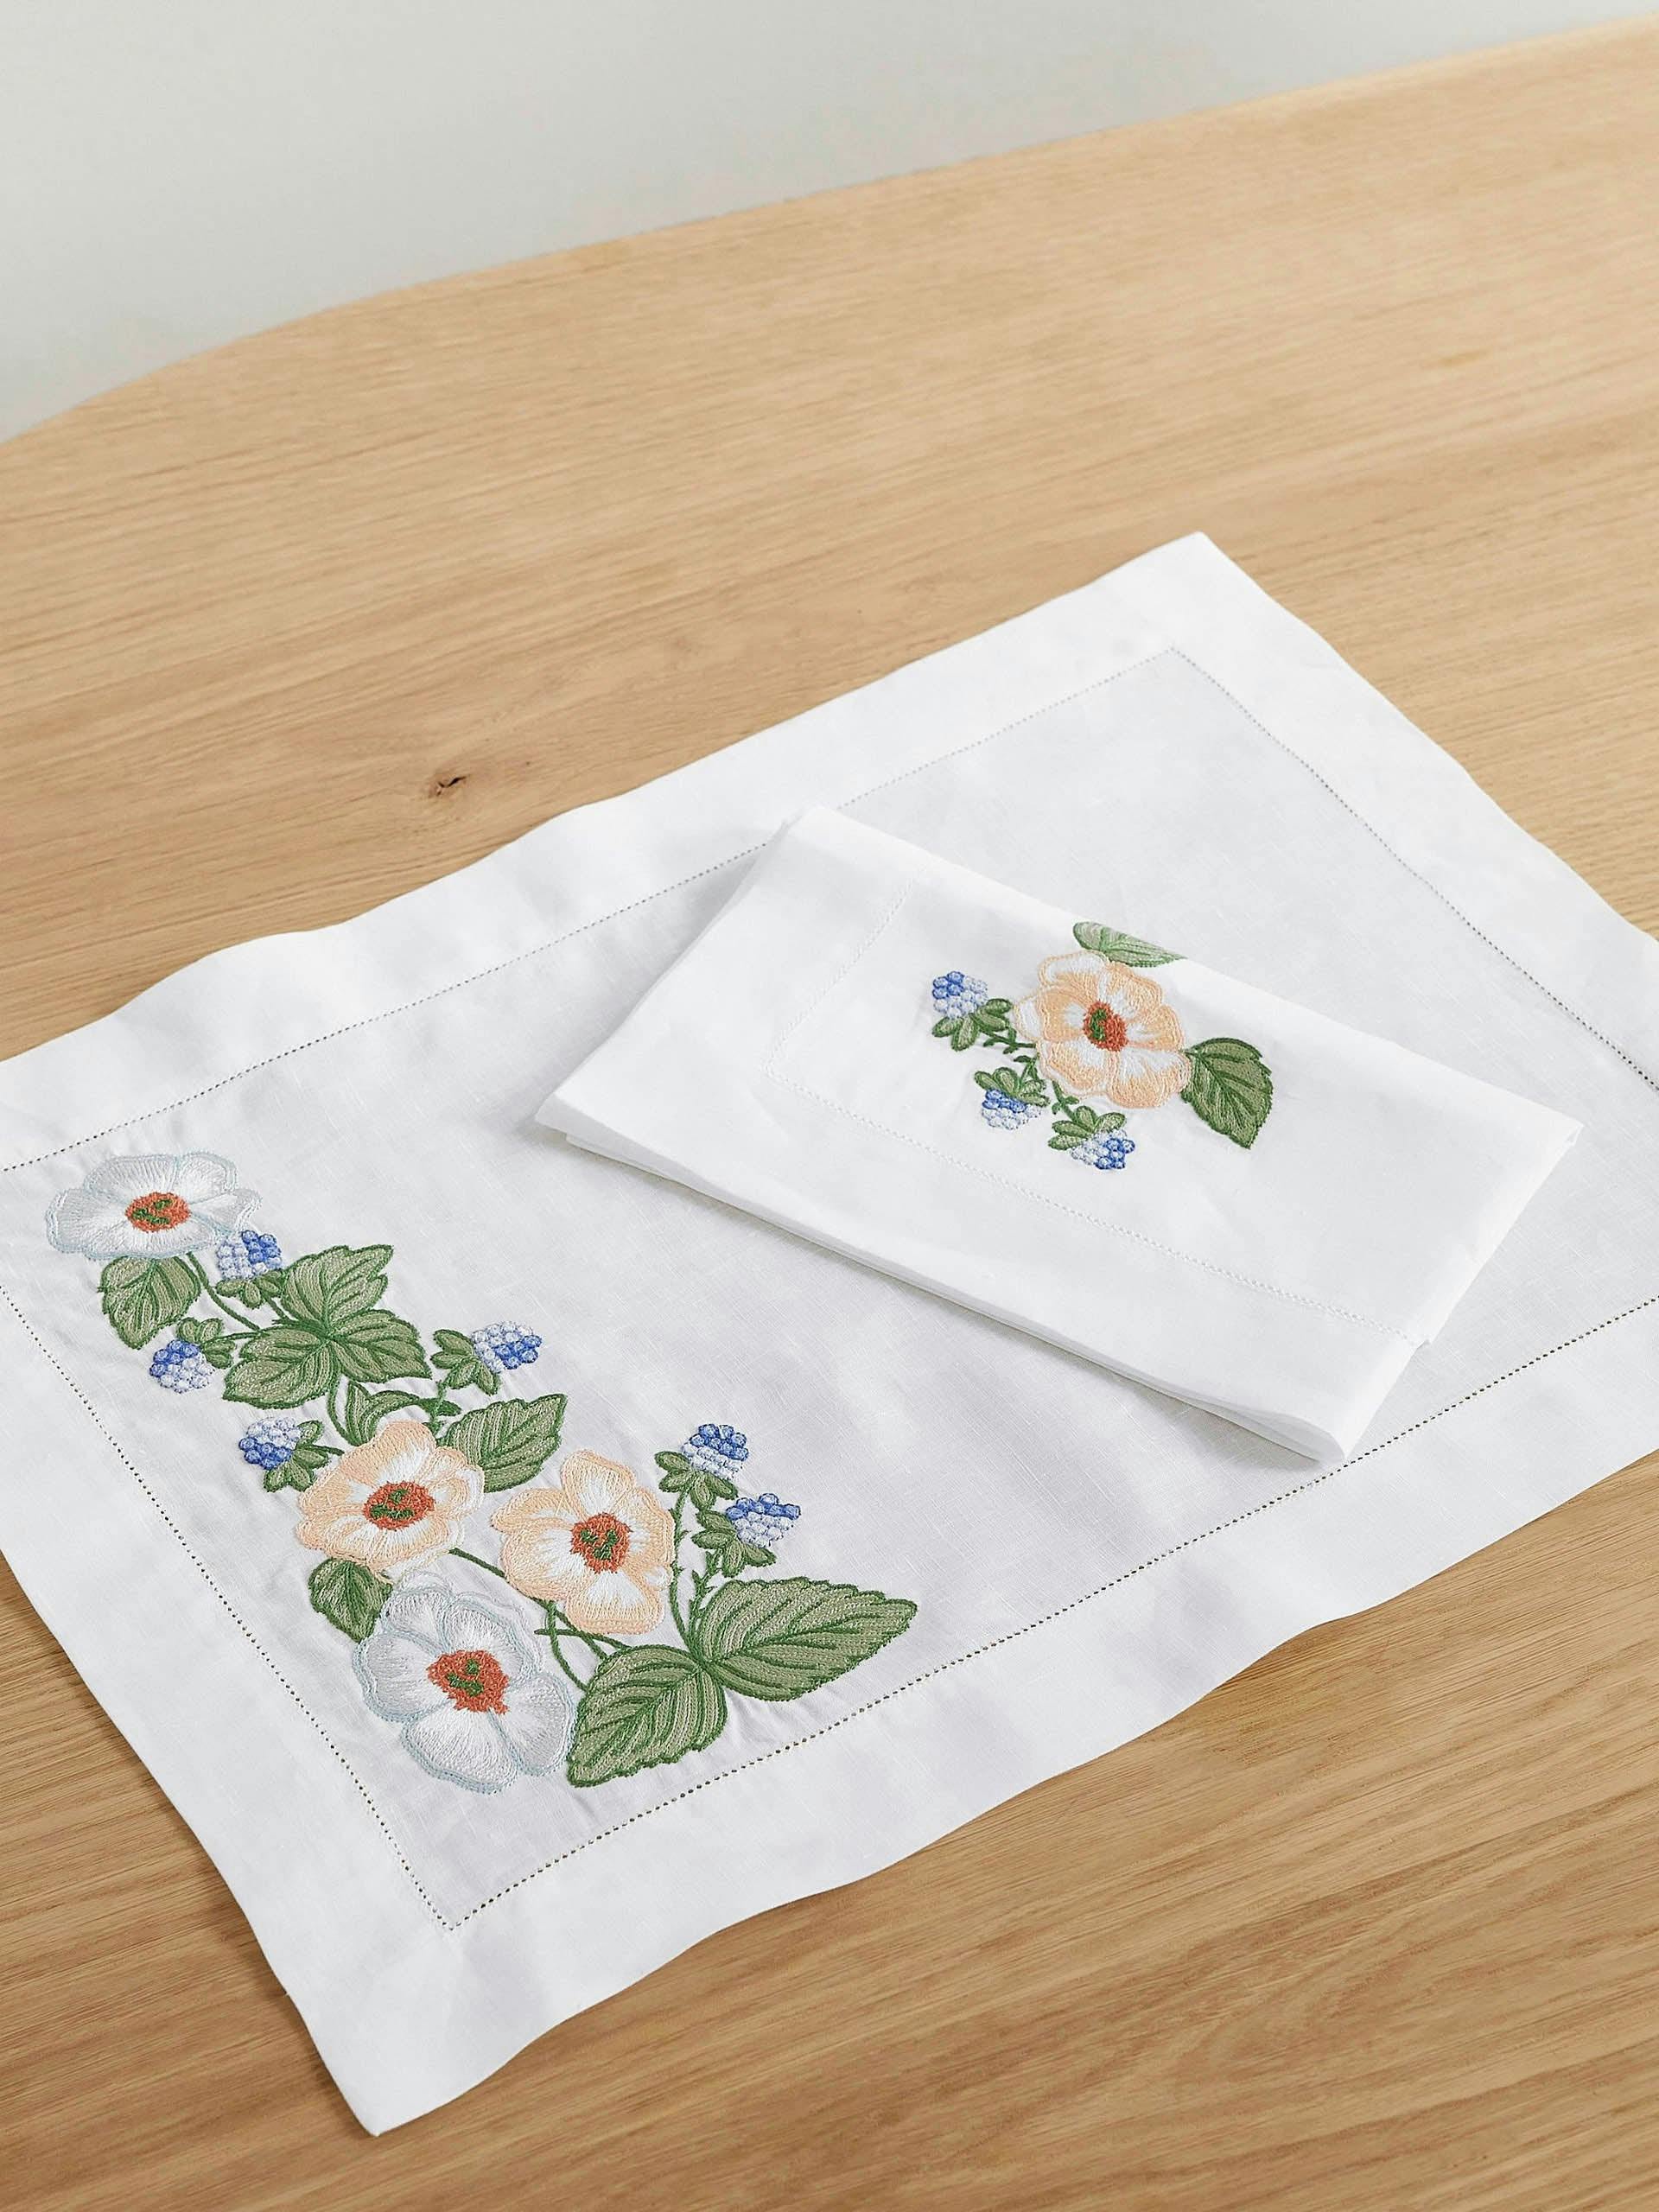 Floral embroidered placemat and napkin set